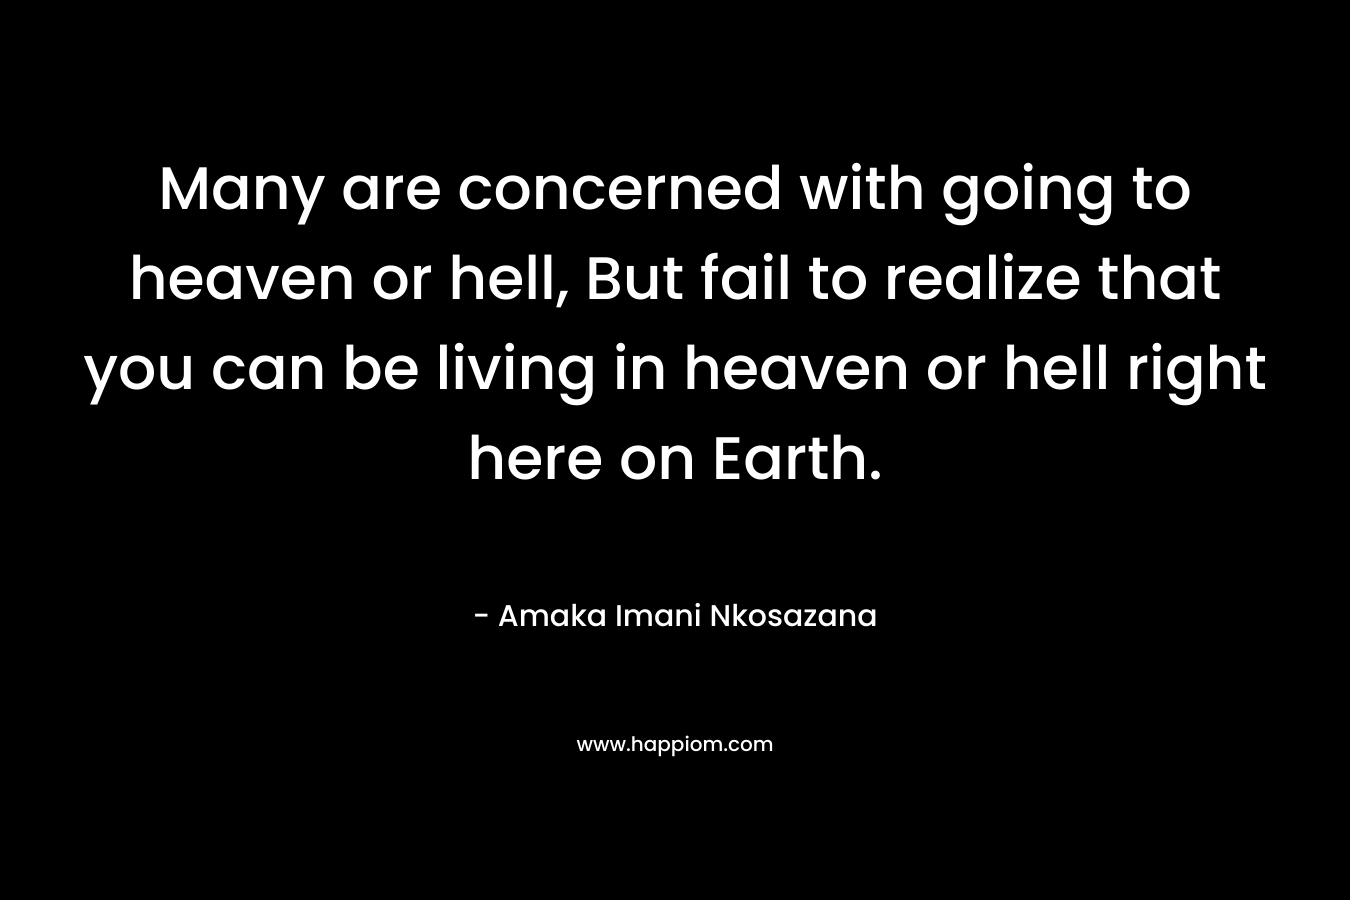 Many are concerned with going to heaven or hell, But fail to realize that you can be living in heaven or hell right here on Earth.